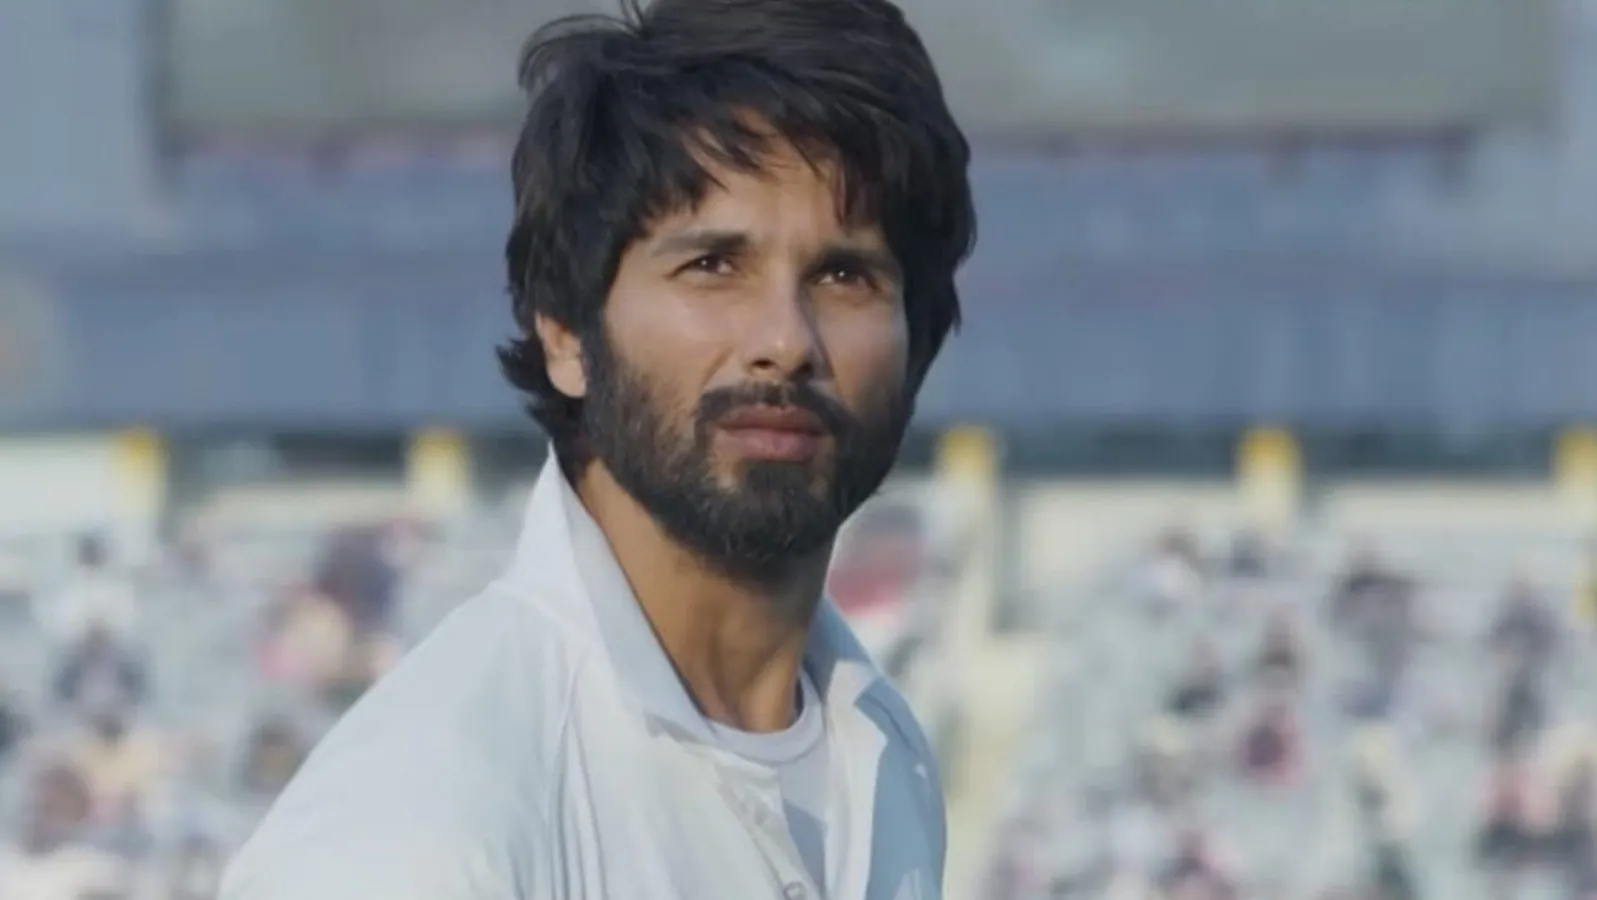 Shahid Kapoor-starrer Jersey’s release was postponed due to plagiarism case, reveals producer: ‘Release cleared now’